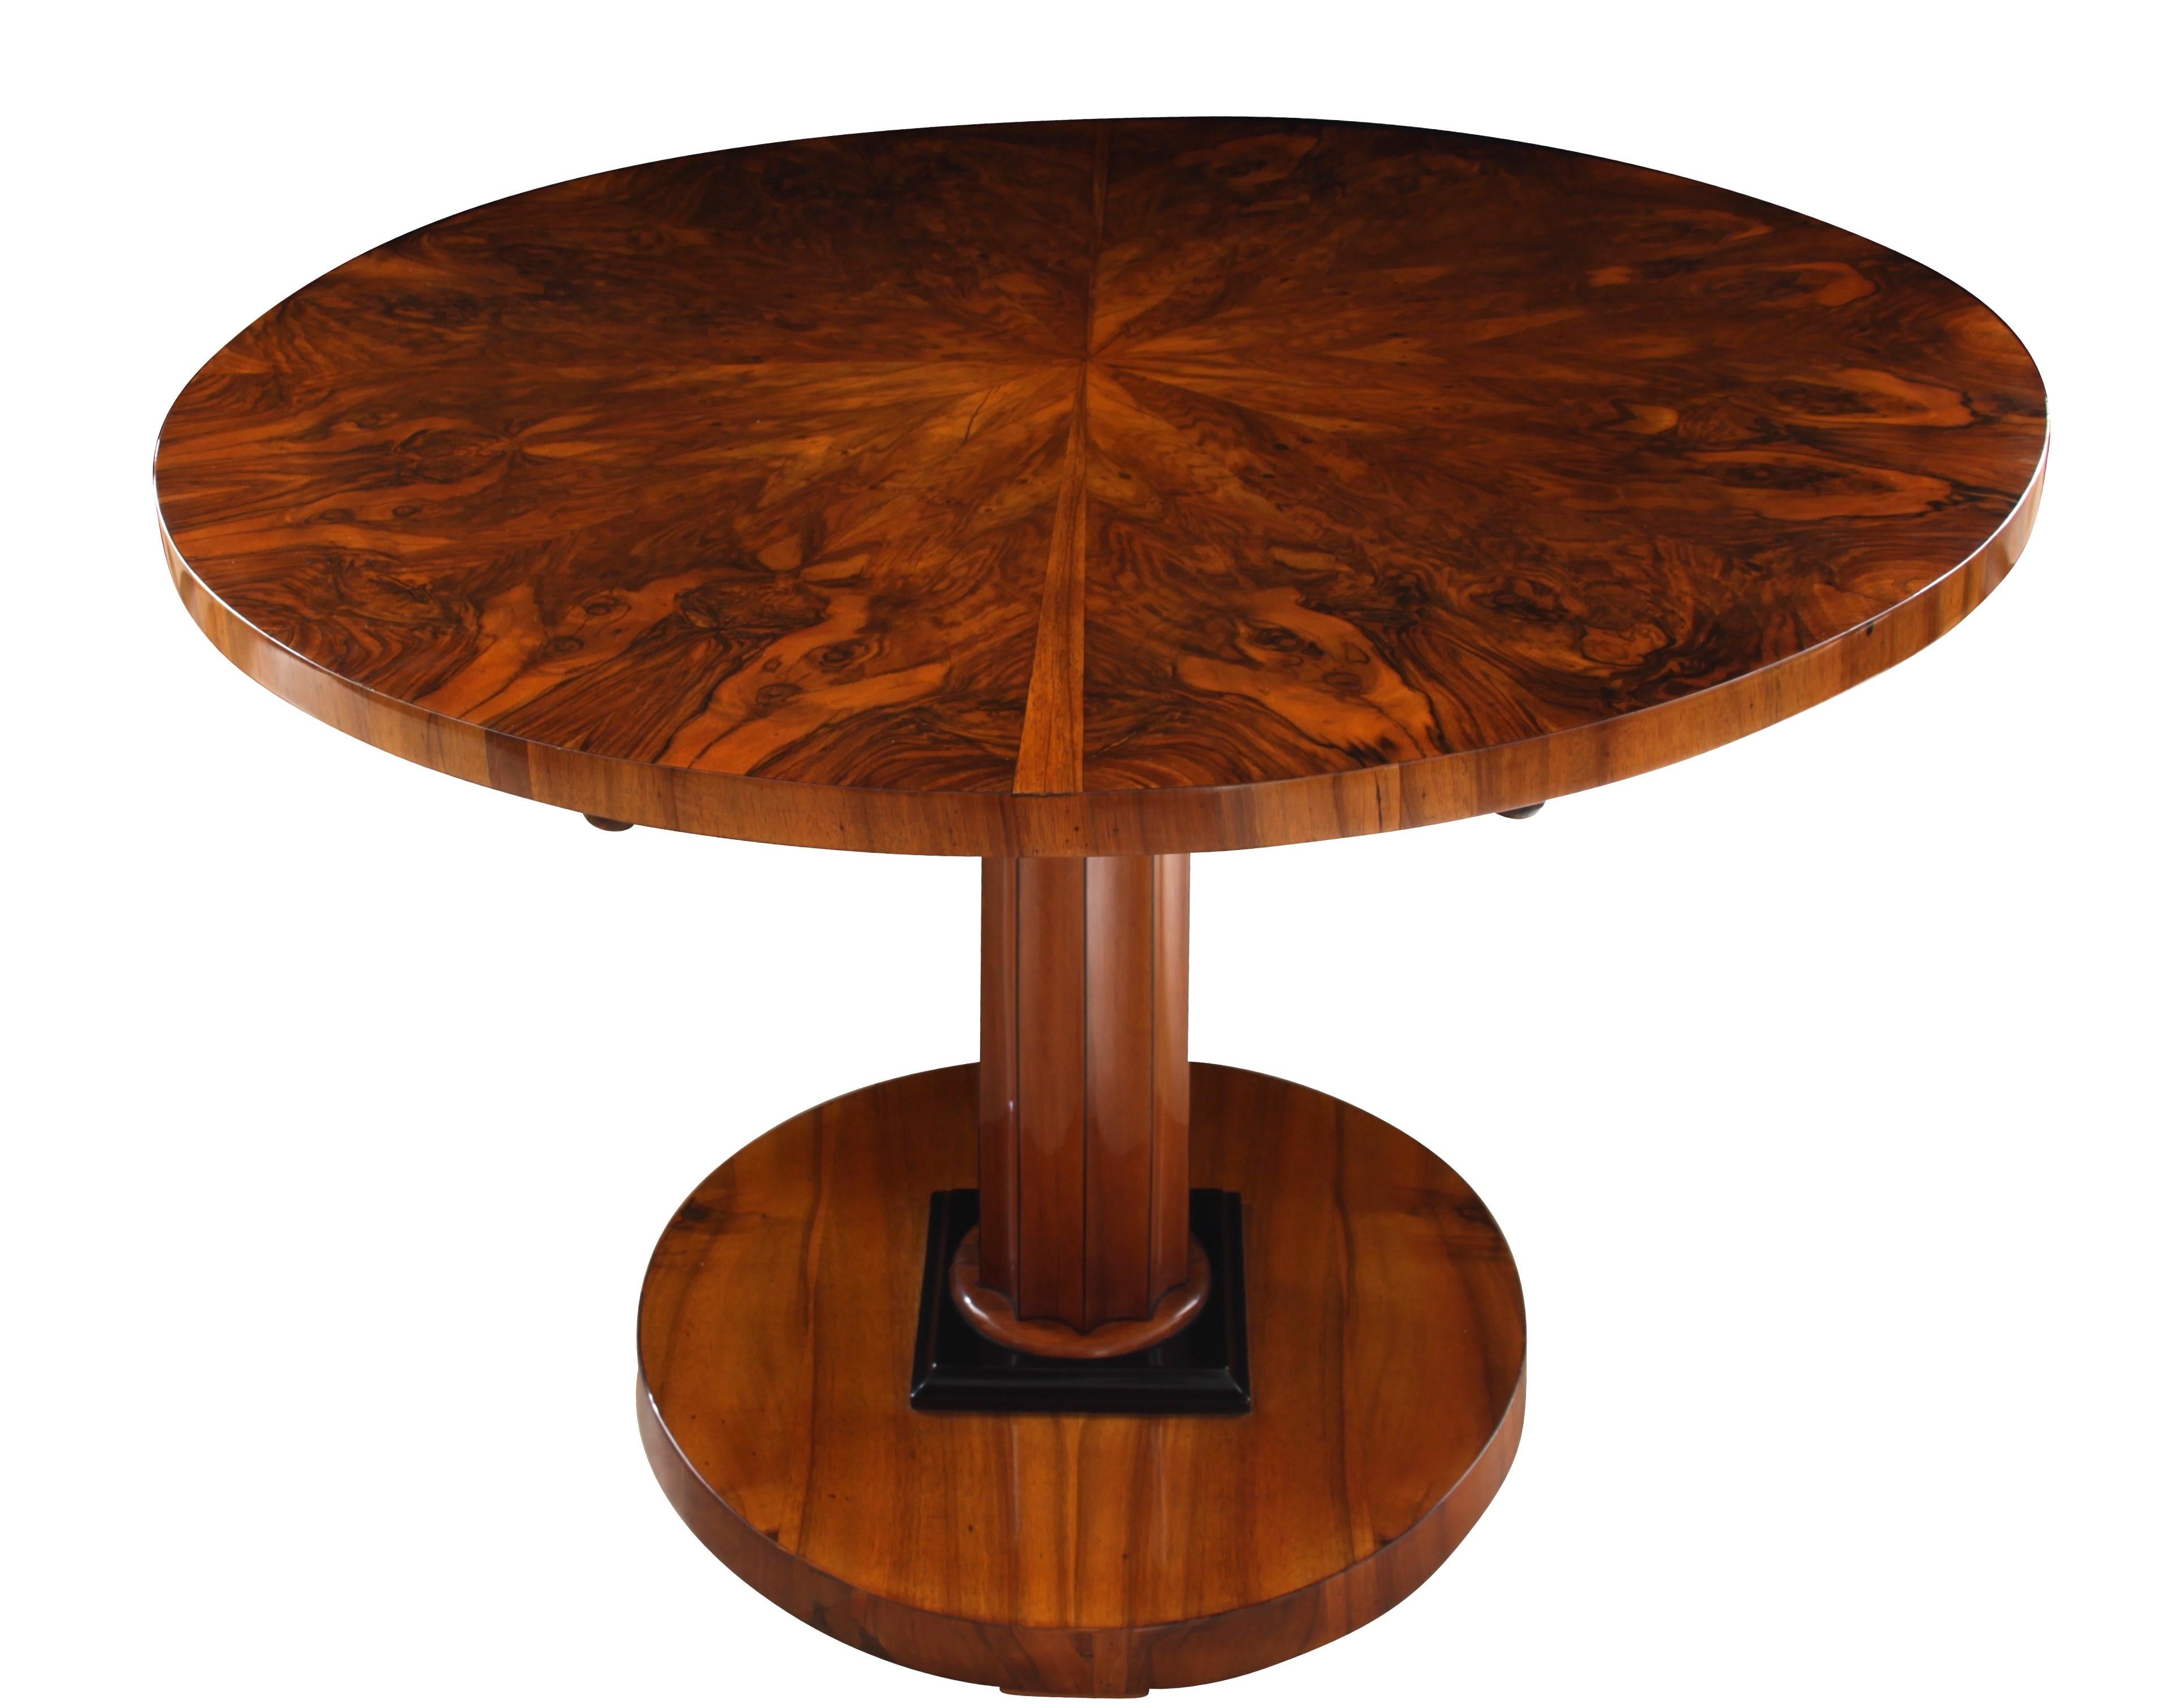 Elegant, neoclassical Biedermeier Tilt-Top table from Vienna, Austria, circa 1825.

Wonderful star-shaped veneer on the plate. 
Cannelured middle column-leg made of walnut solid wood.
Round, ebonized pedestral and ebonized tips of the